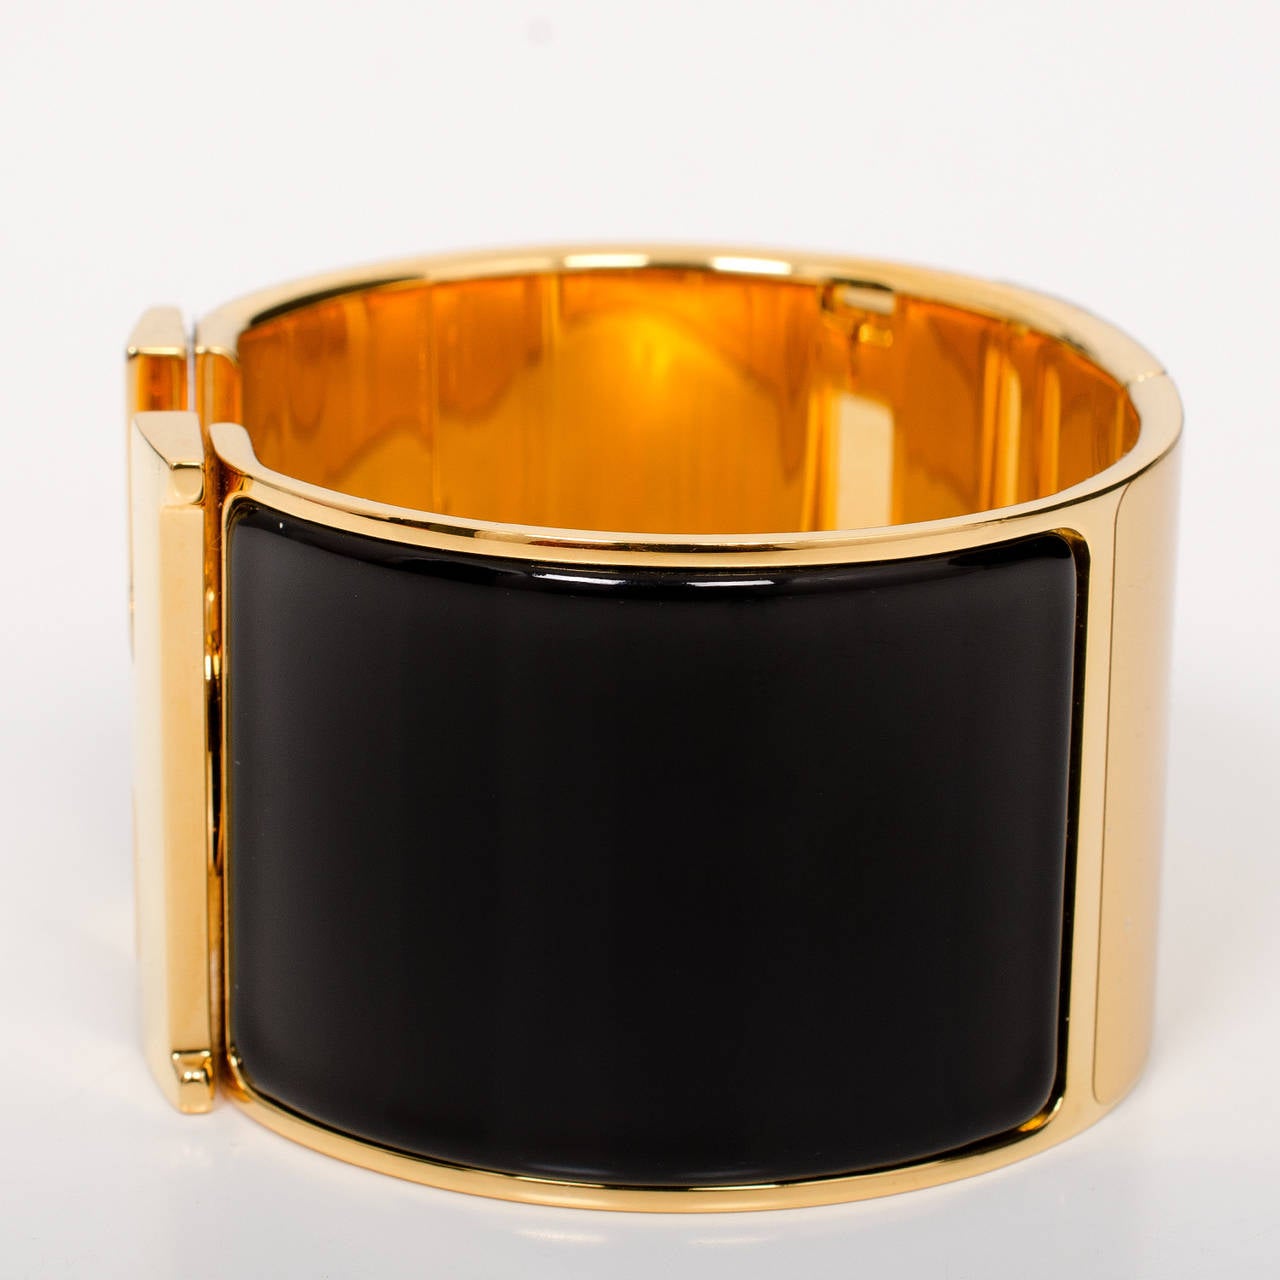 Hermes extra wide Clic Clac H bracelet in black enamel with gold plated hardware in size PM.

Origin: France

Condition: Pristine; store fresh condition

Accompanied by: Hermes box, Hermes dustbag

Measurements: Diameter: 2.25